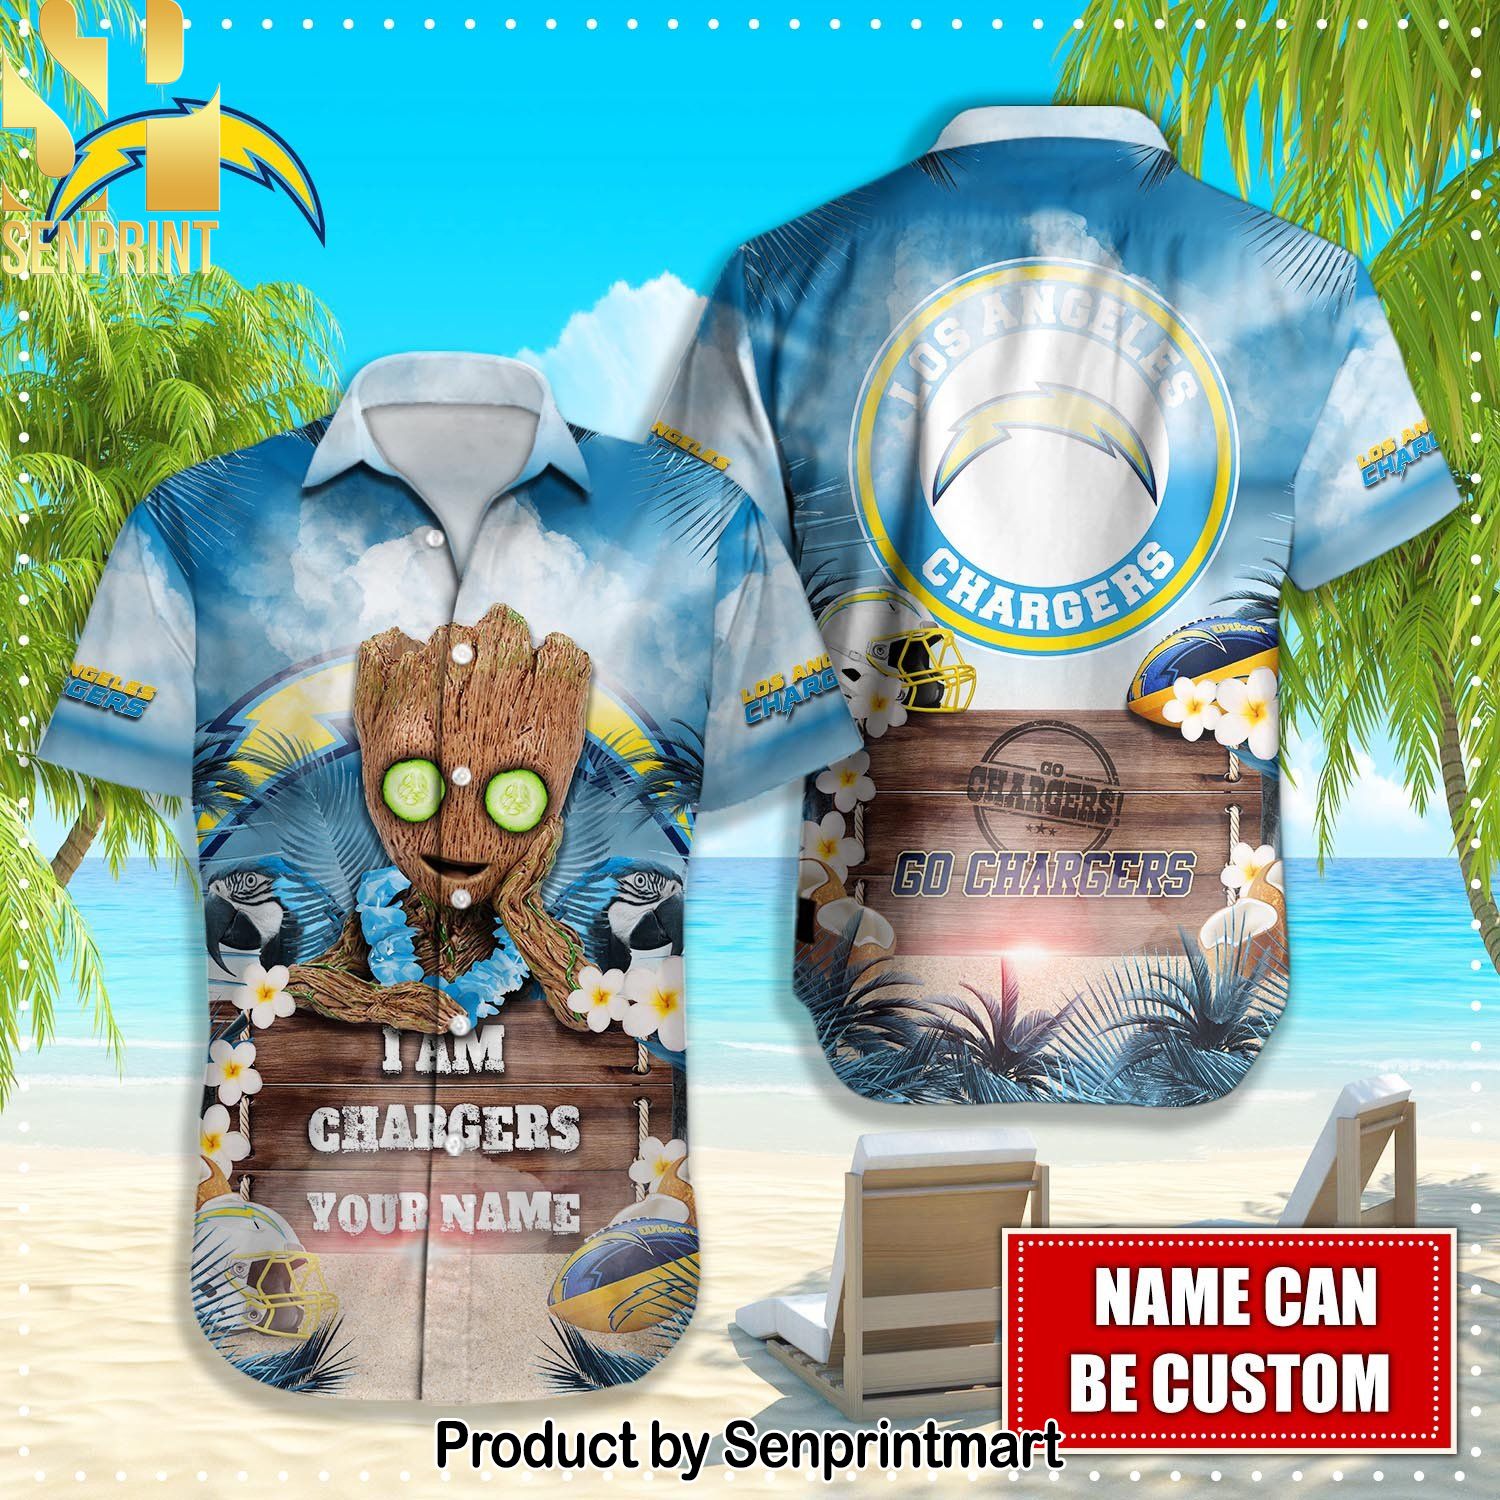 Los Angeles Chargers NFL Classic Hawaiian Shirt and Shorts